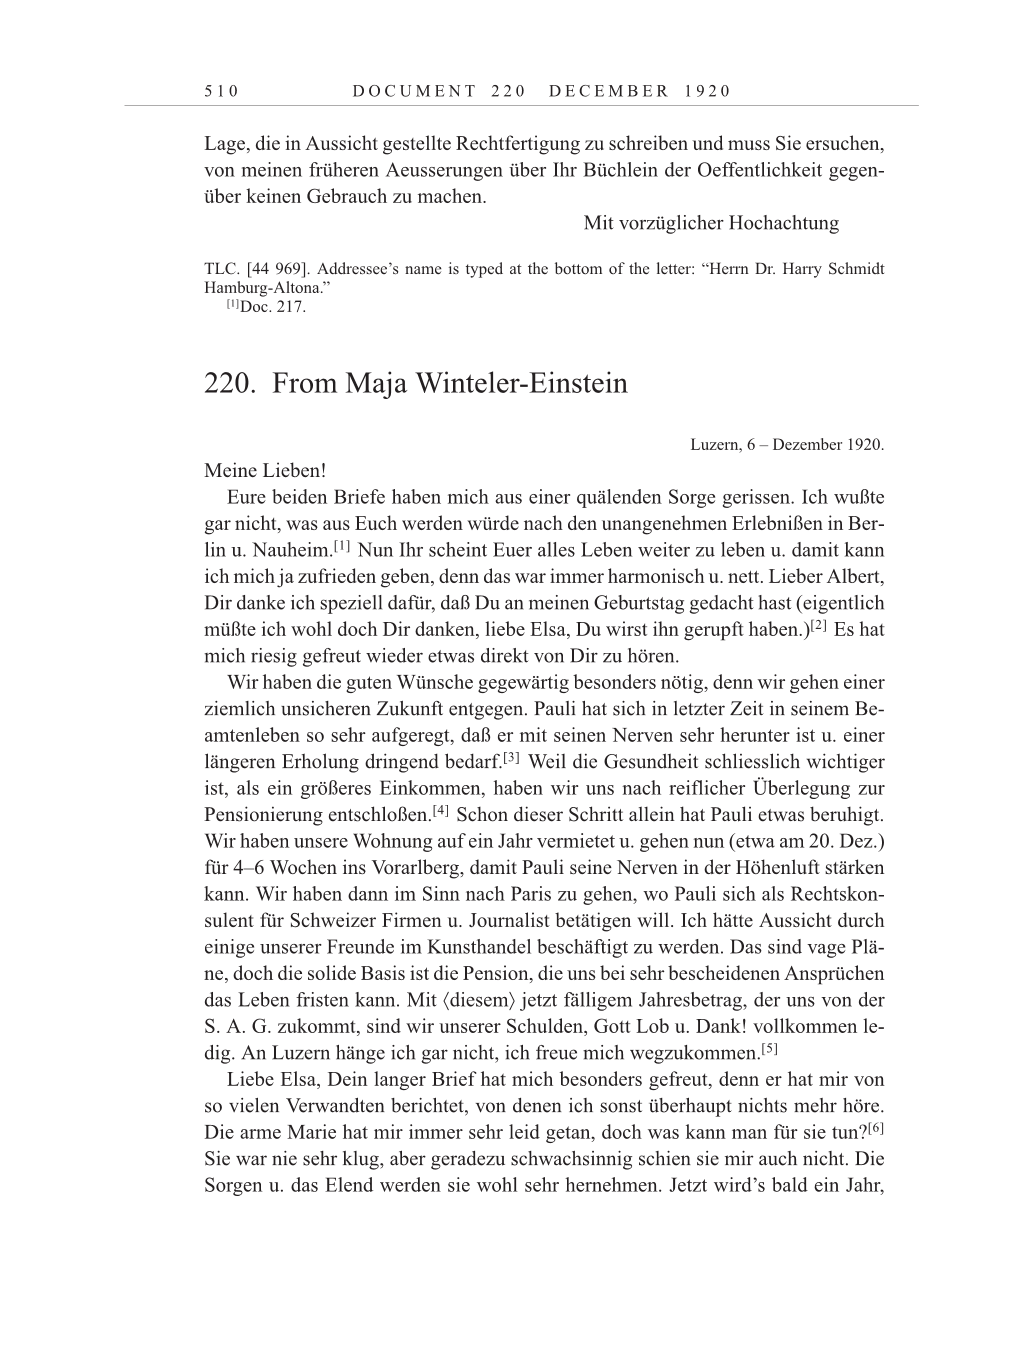 Volume 10: The Berlin Years: Correspondence May-December 1920 / Supplementary Correspondence 1909-1920 page 510